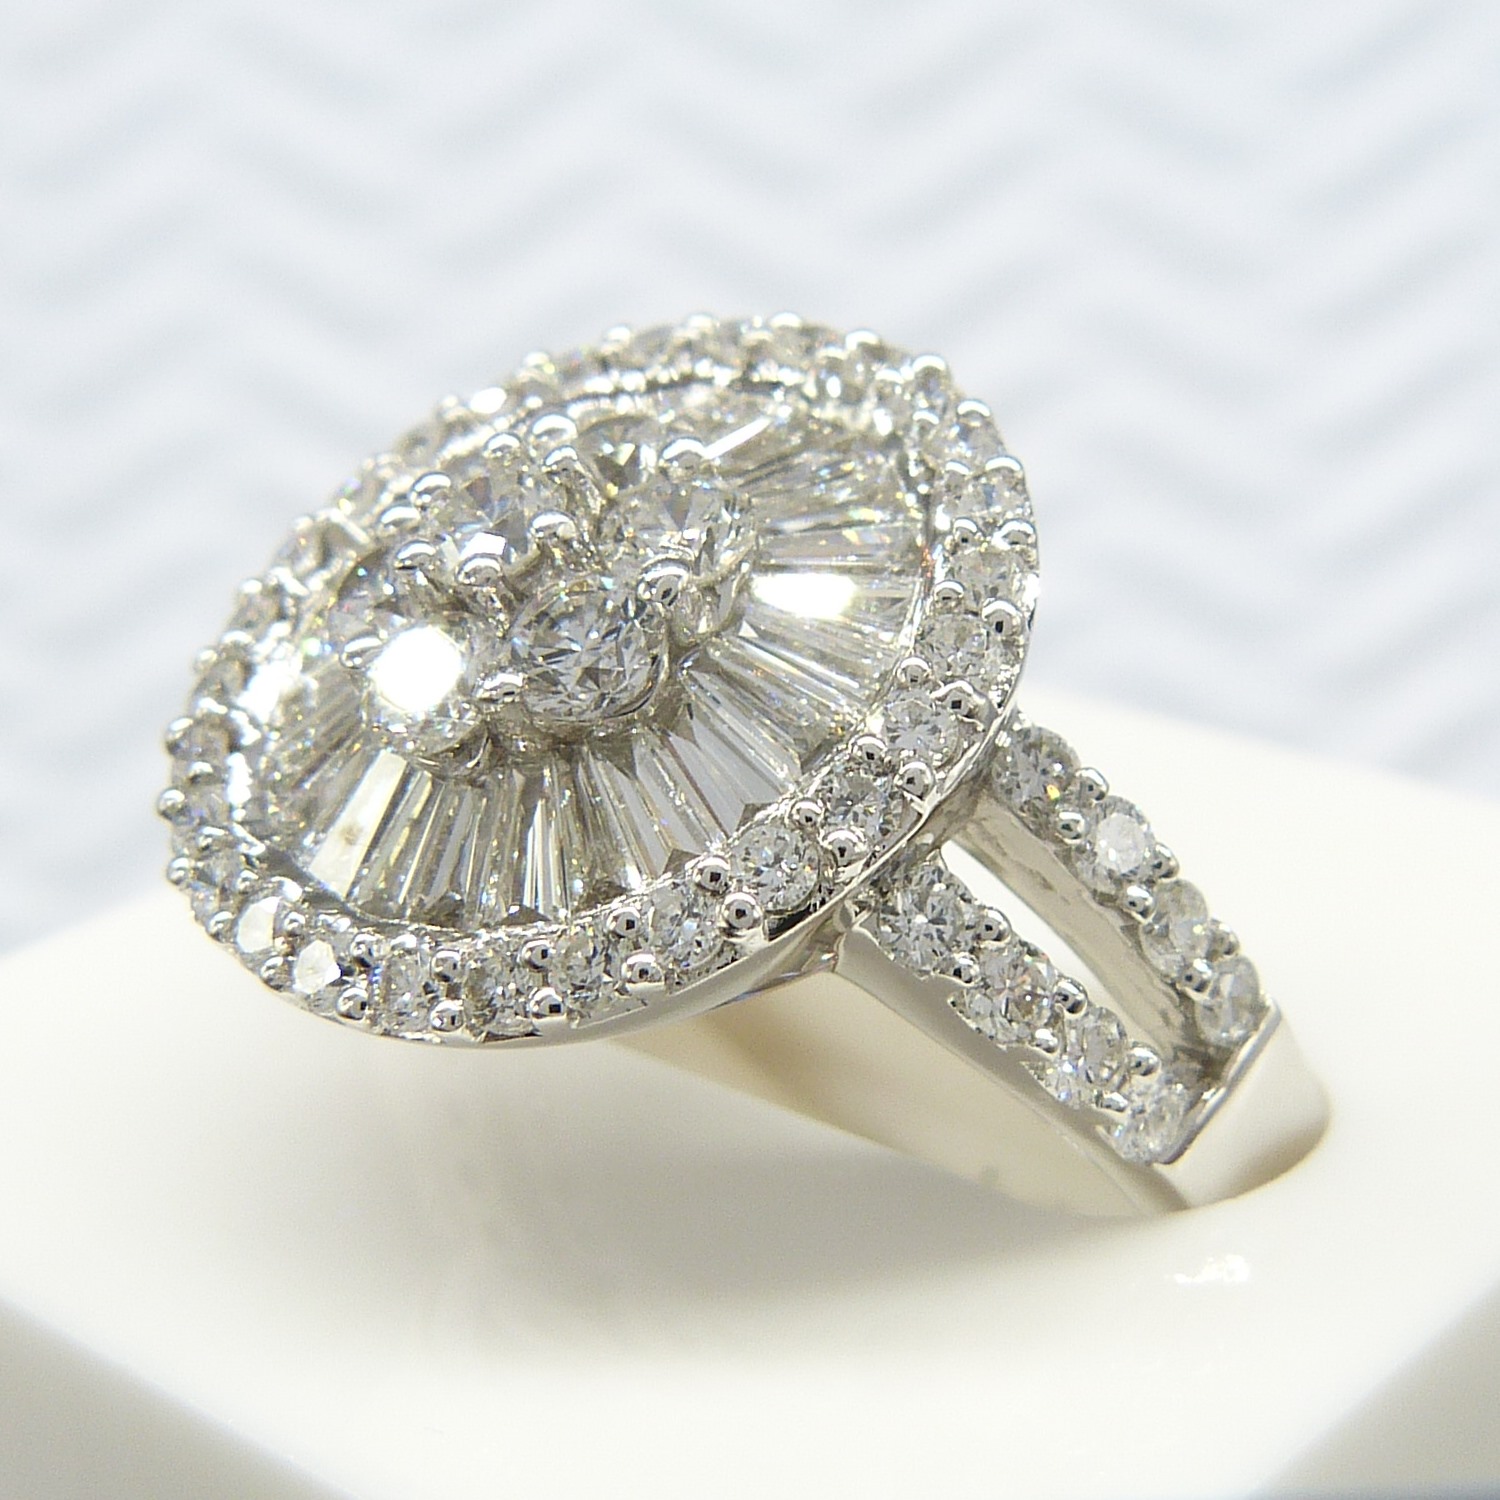 An attractive, certificated, 2.05 carat Diamond cluster ring in 18k white Gold, with Diamond - Image 4 of 10